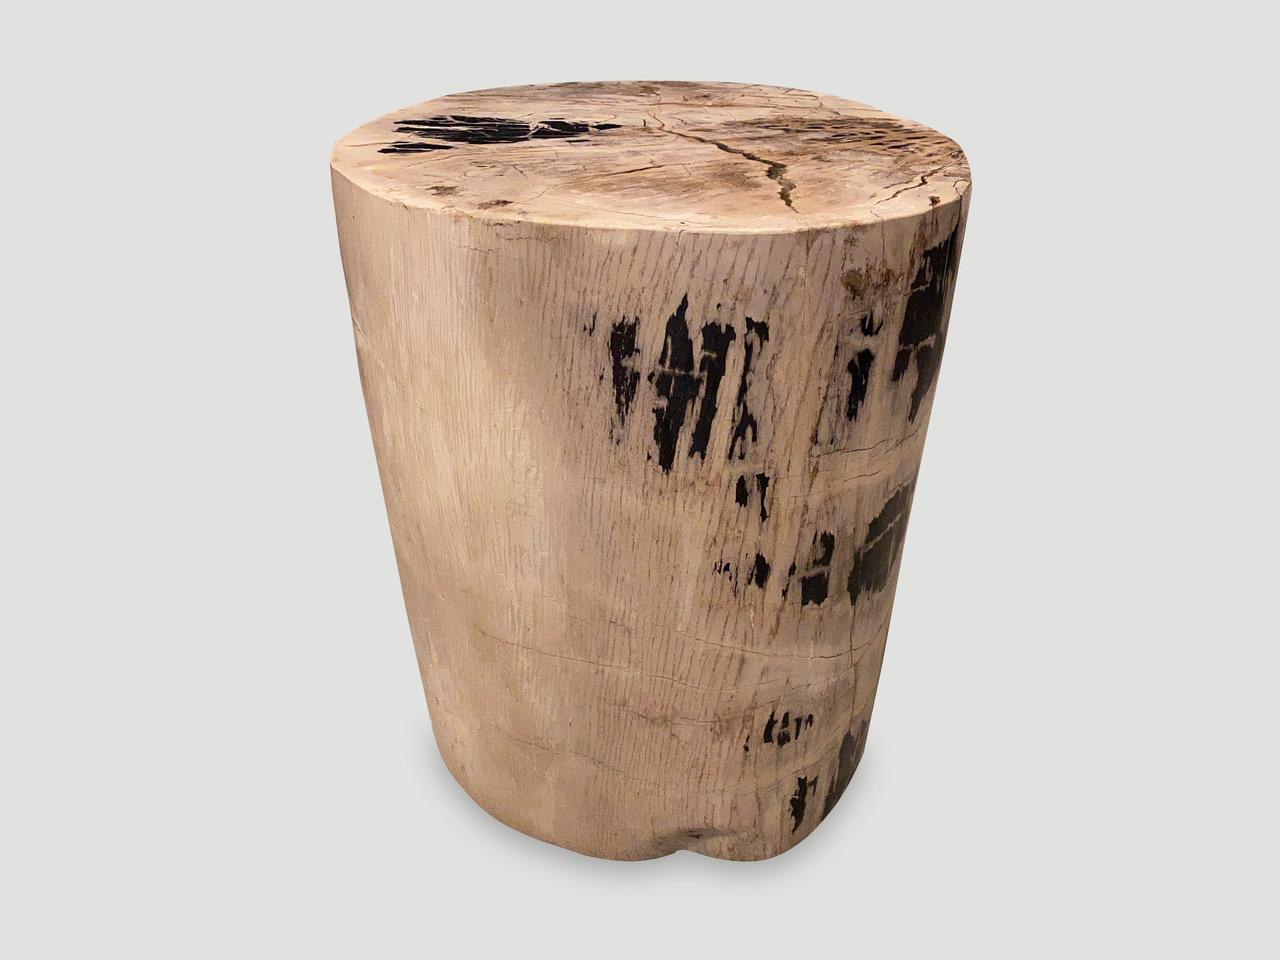 Impressive beautiful tones and markings on this ancient high quality petrified wood side table. It’s fascinating how Mother Nature produces these exquisite 40 million year old petrified teak logs with such contrasting colors and natural patterns